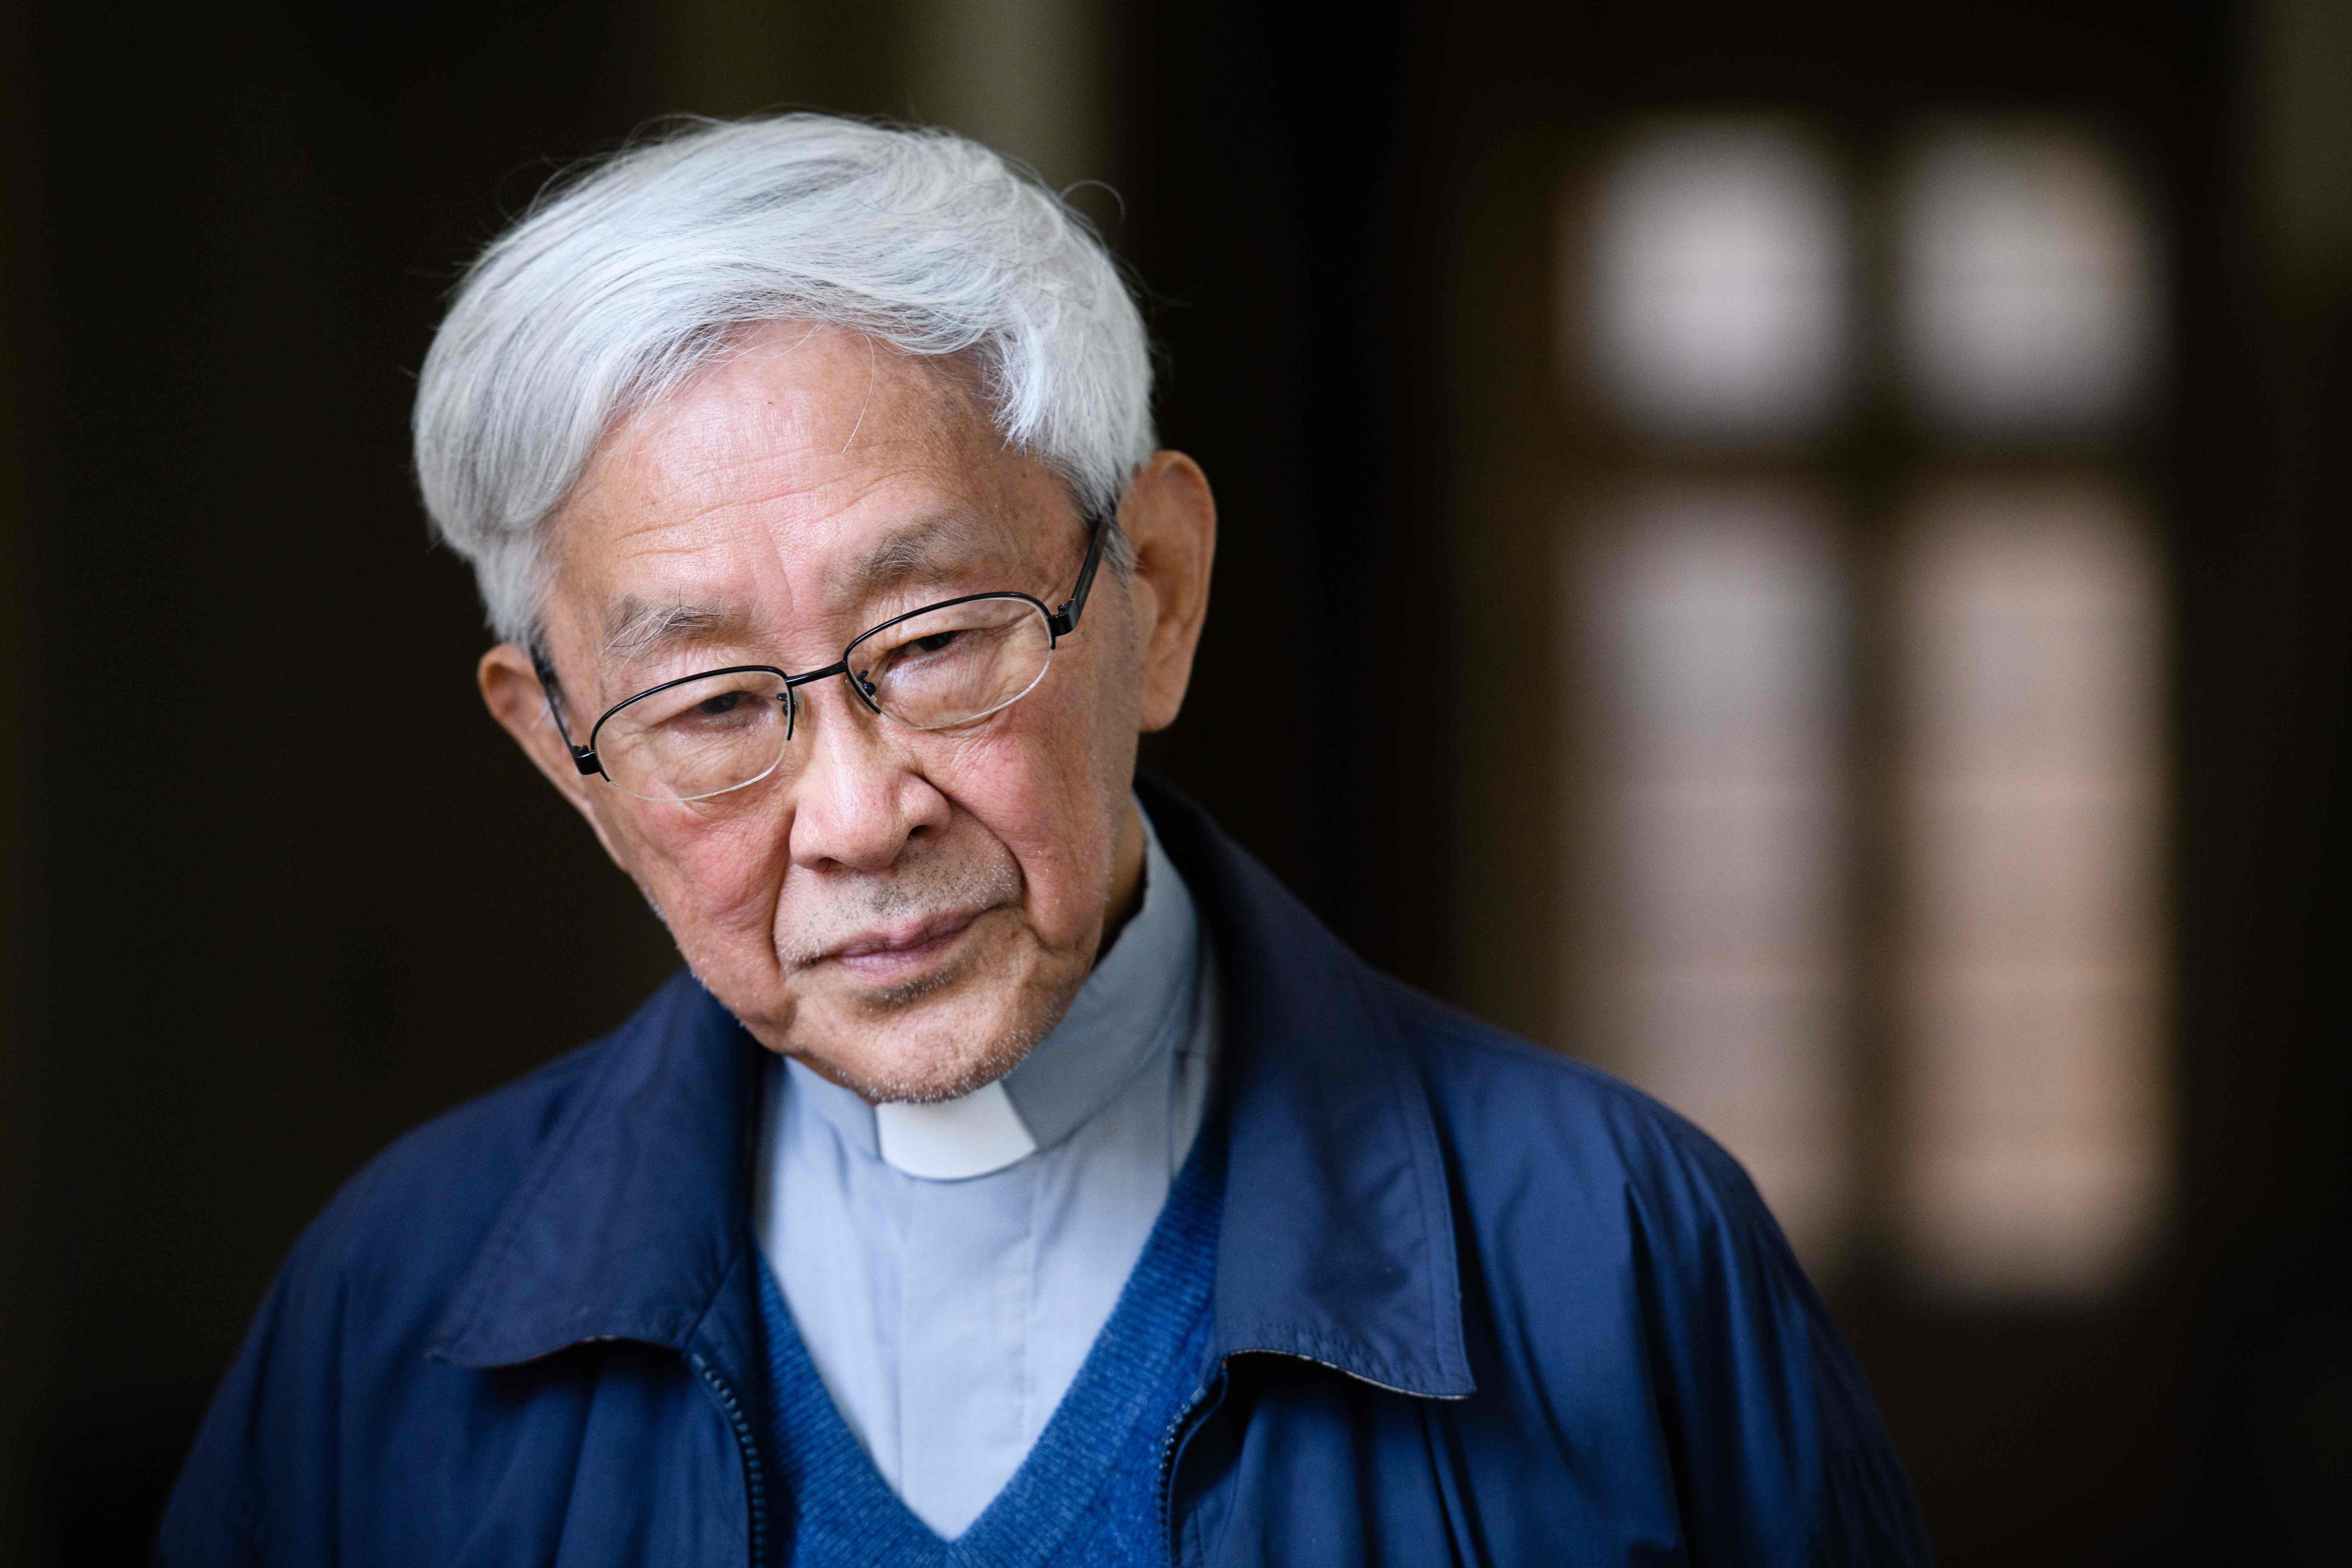 The arrest of Cardinal Joseph Zen by national security police was condemned by Western governments, while the Vatican said it was monitoring developments in the case carefully. Photo: AFP